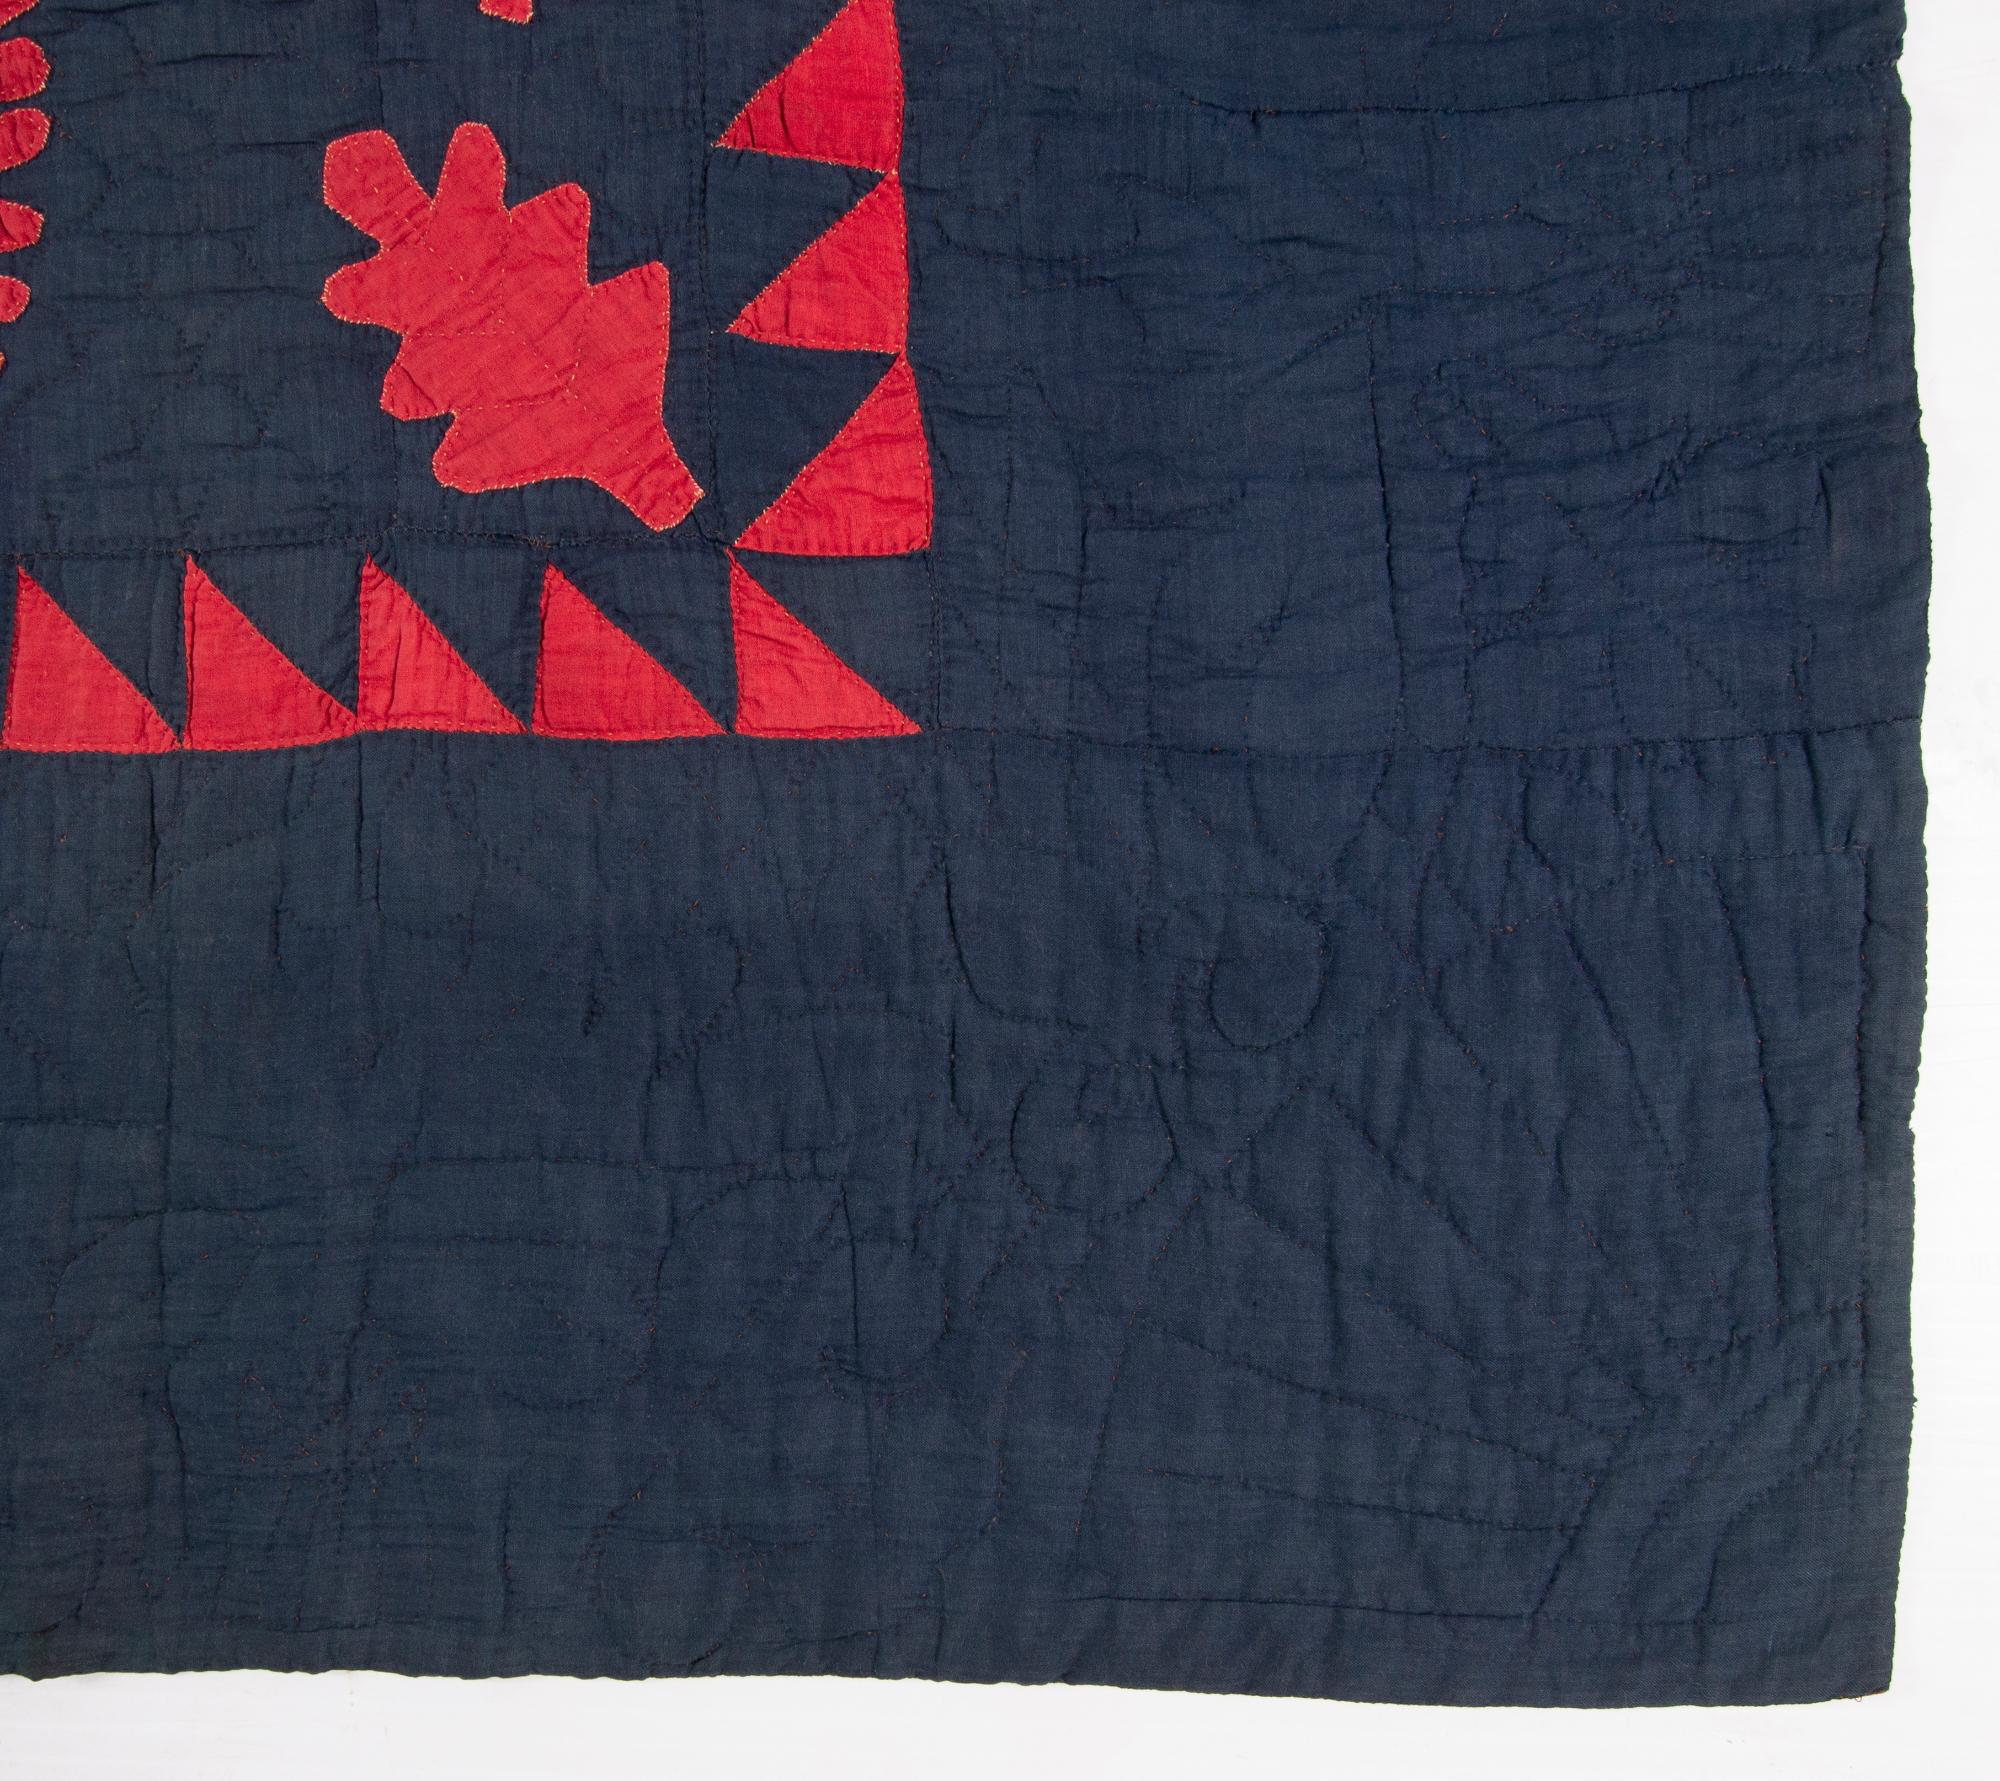 Red and blue princess feather pattern quilt with interspersed oak leaves and a sawtooth border. Made circa 1870-1885, this stunningly visual textile is highly unusual due to its dark blue ground and red elements. Most all early quilts in this style